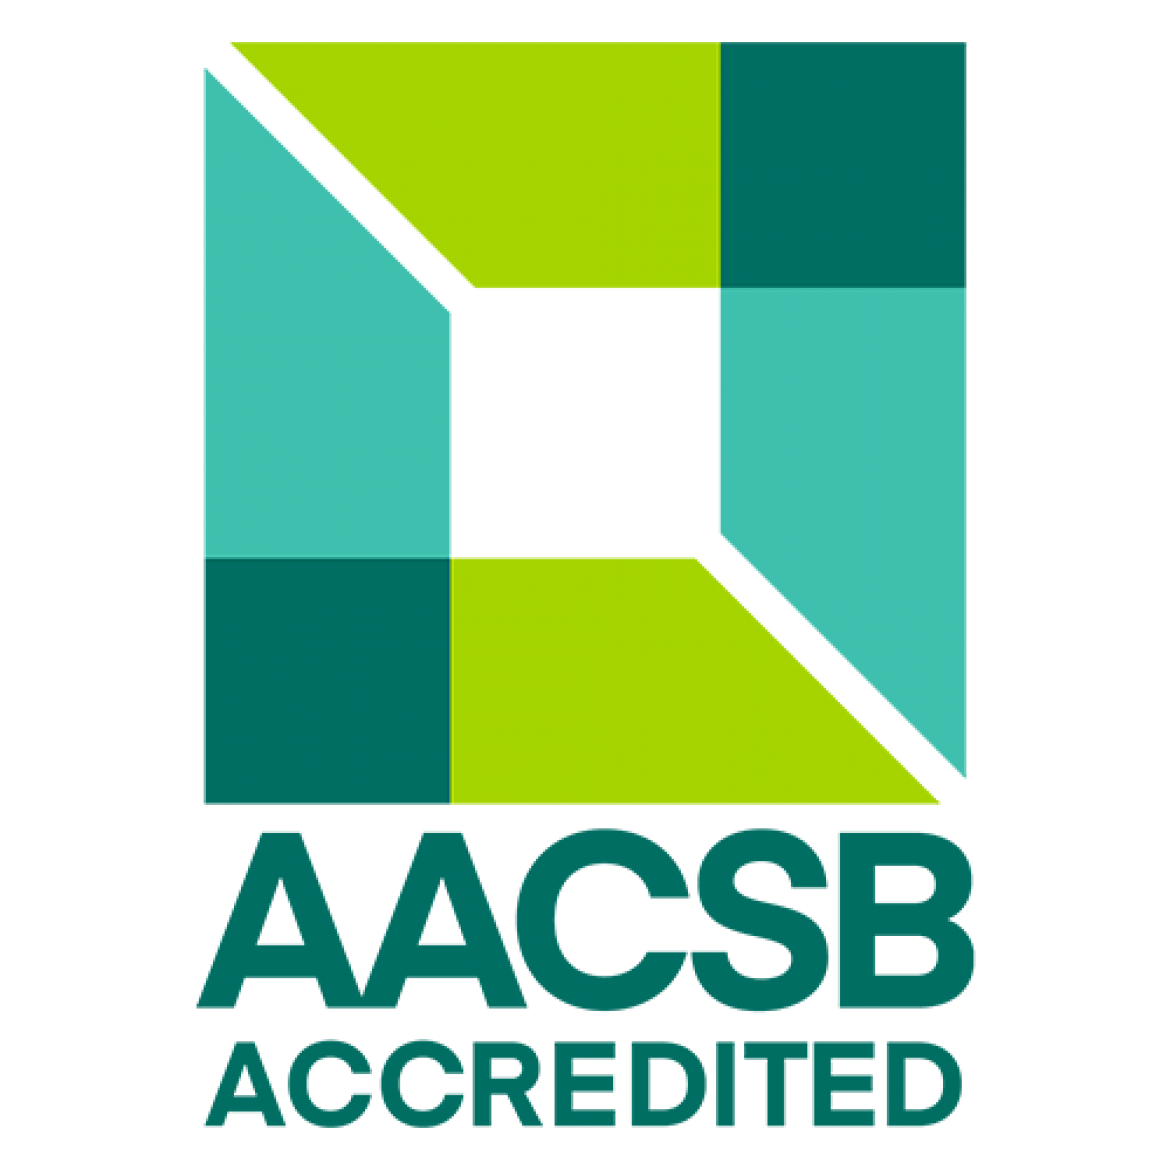 AACSB accredited logo